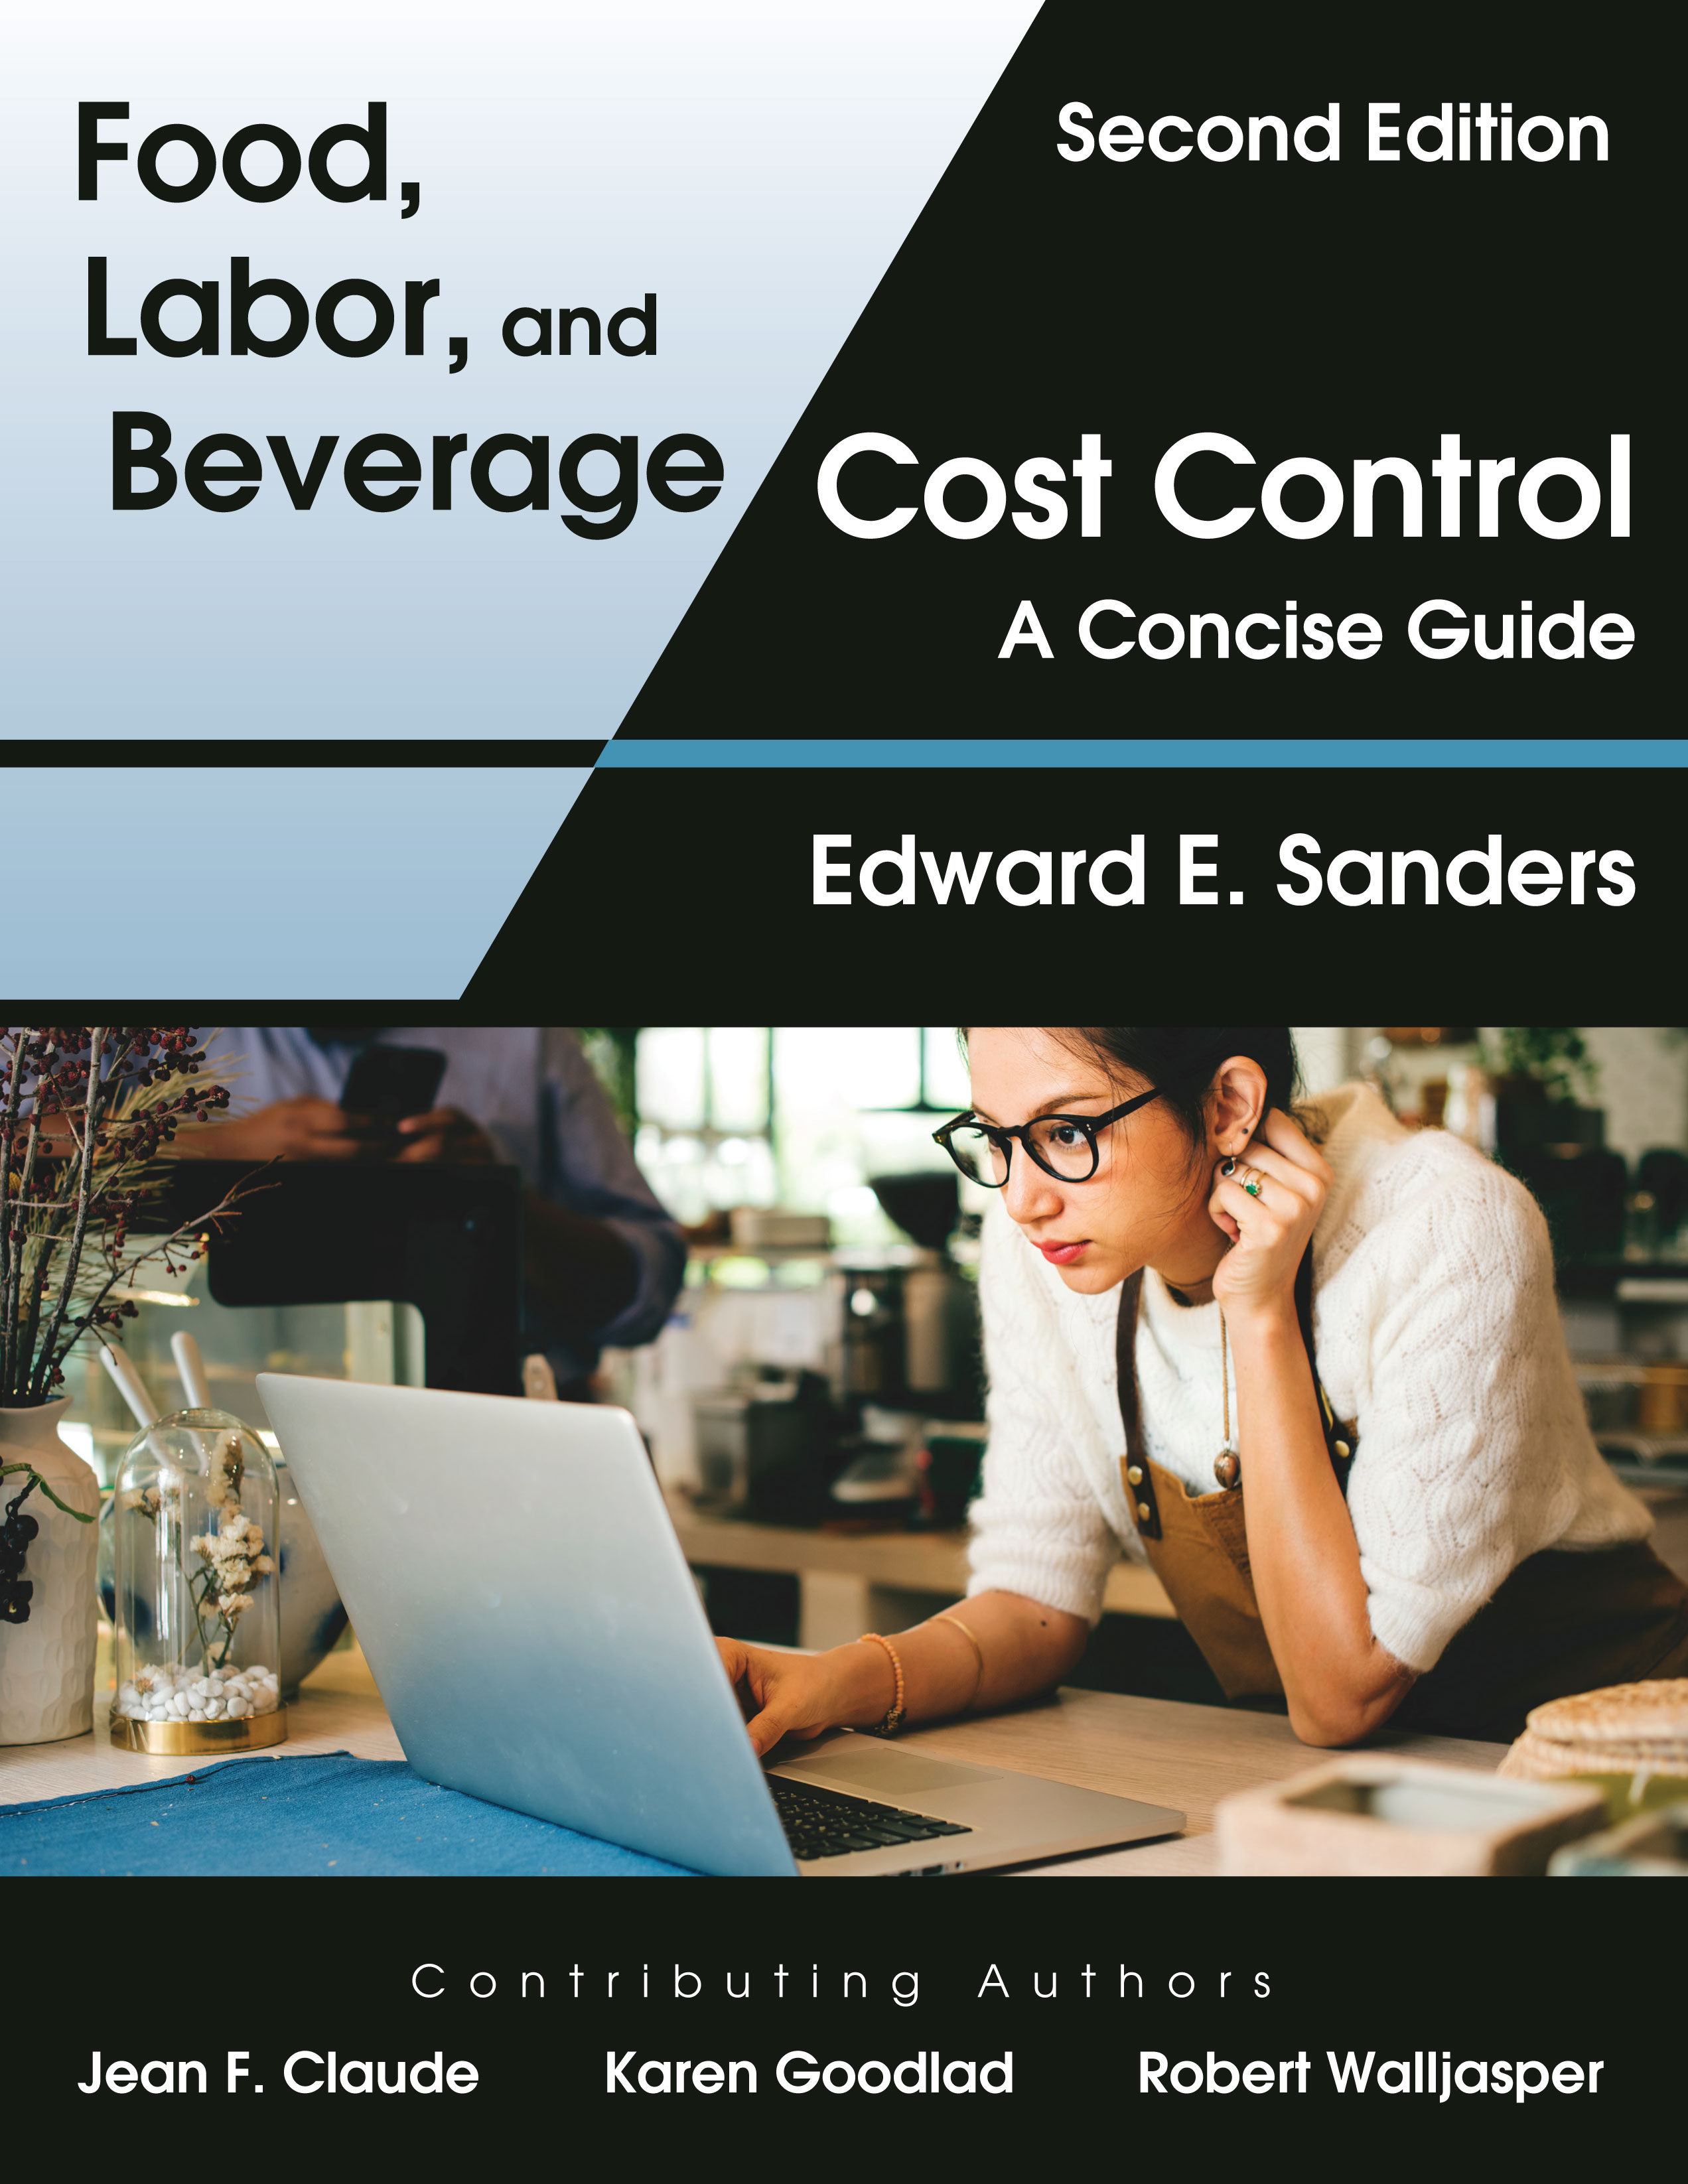 Food, Labor, and Beverage Cost Control: A Concise Guide, Second Edition by Edward E. Sanders